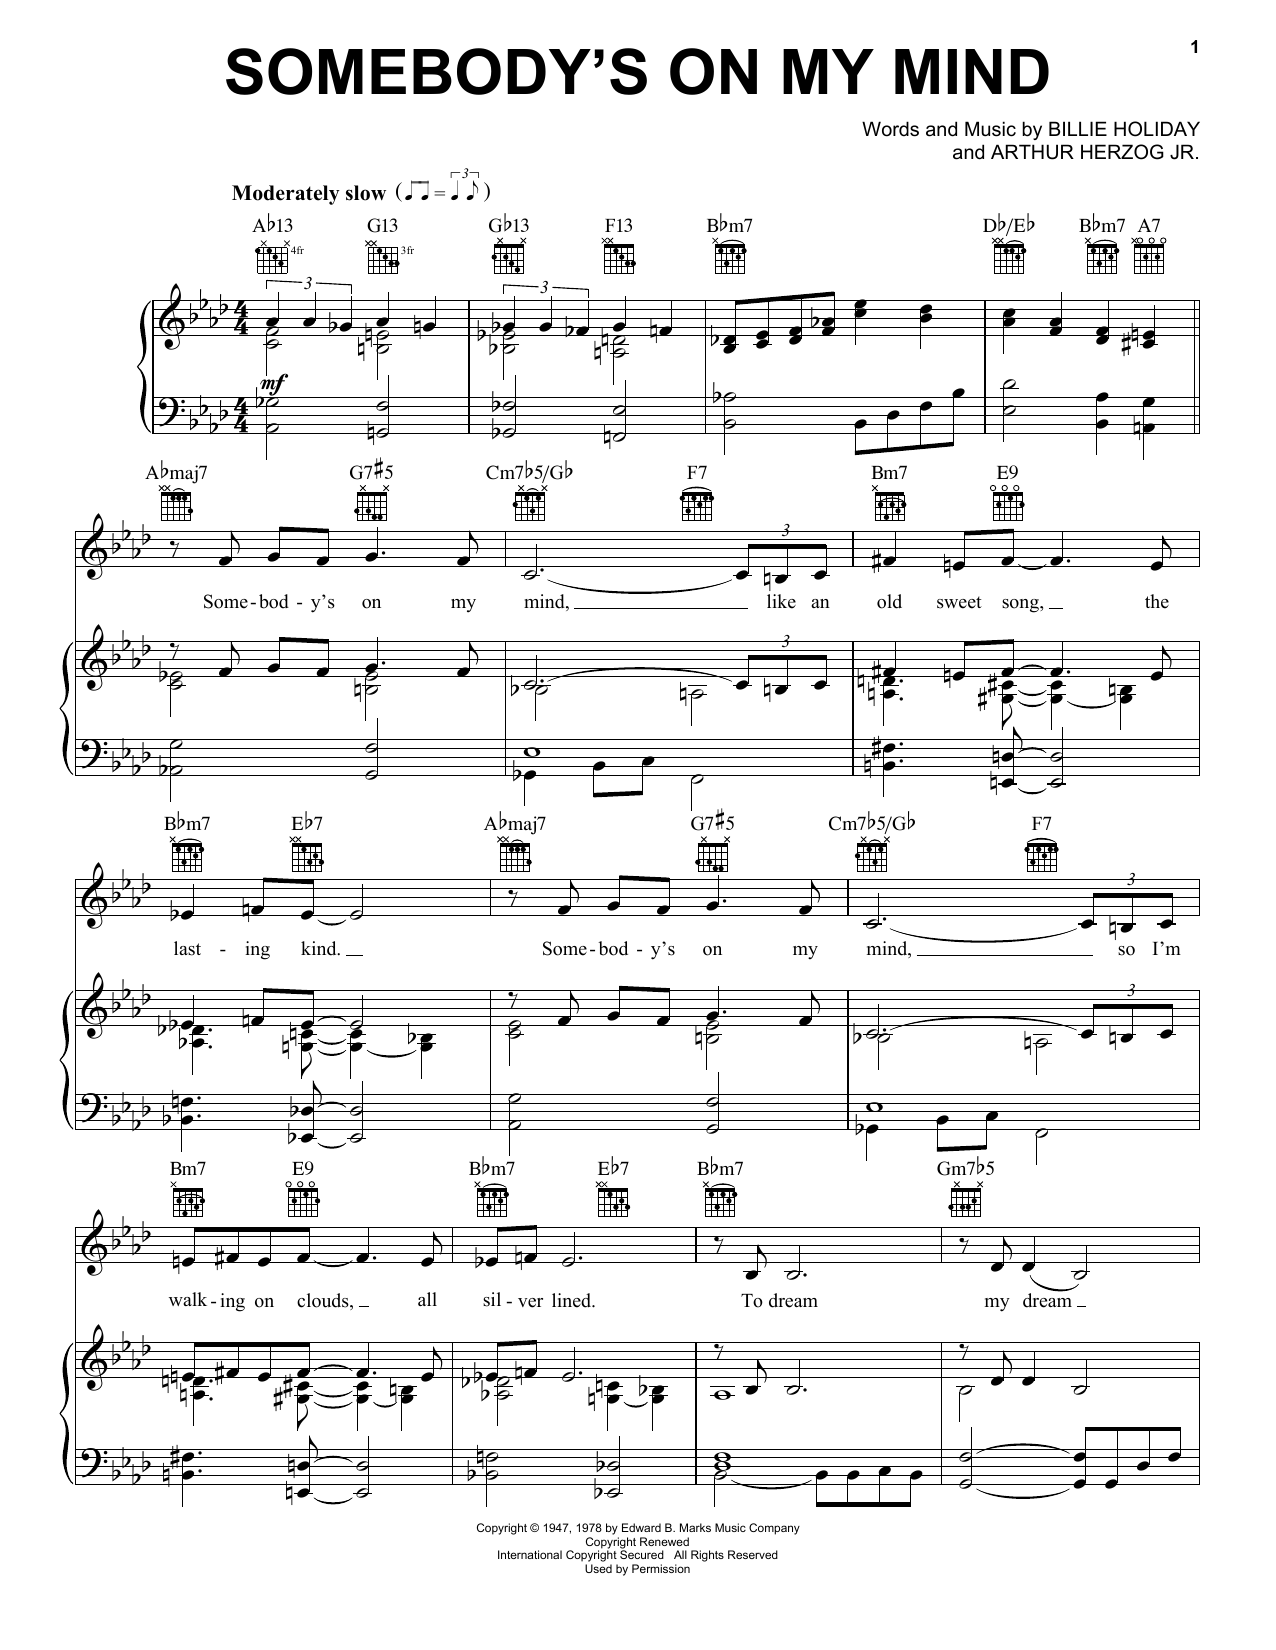 Download Billie Holiday Somebody's On My Mind Sheet Music